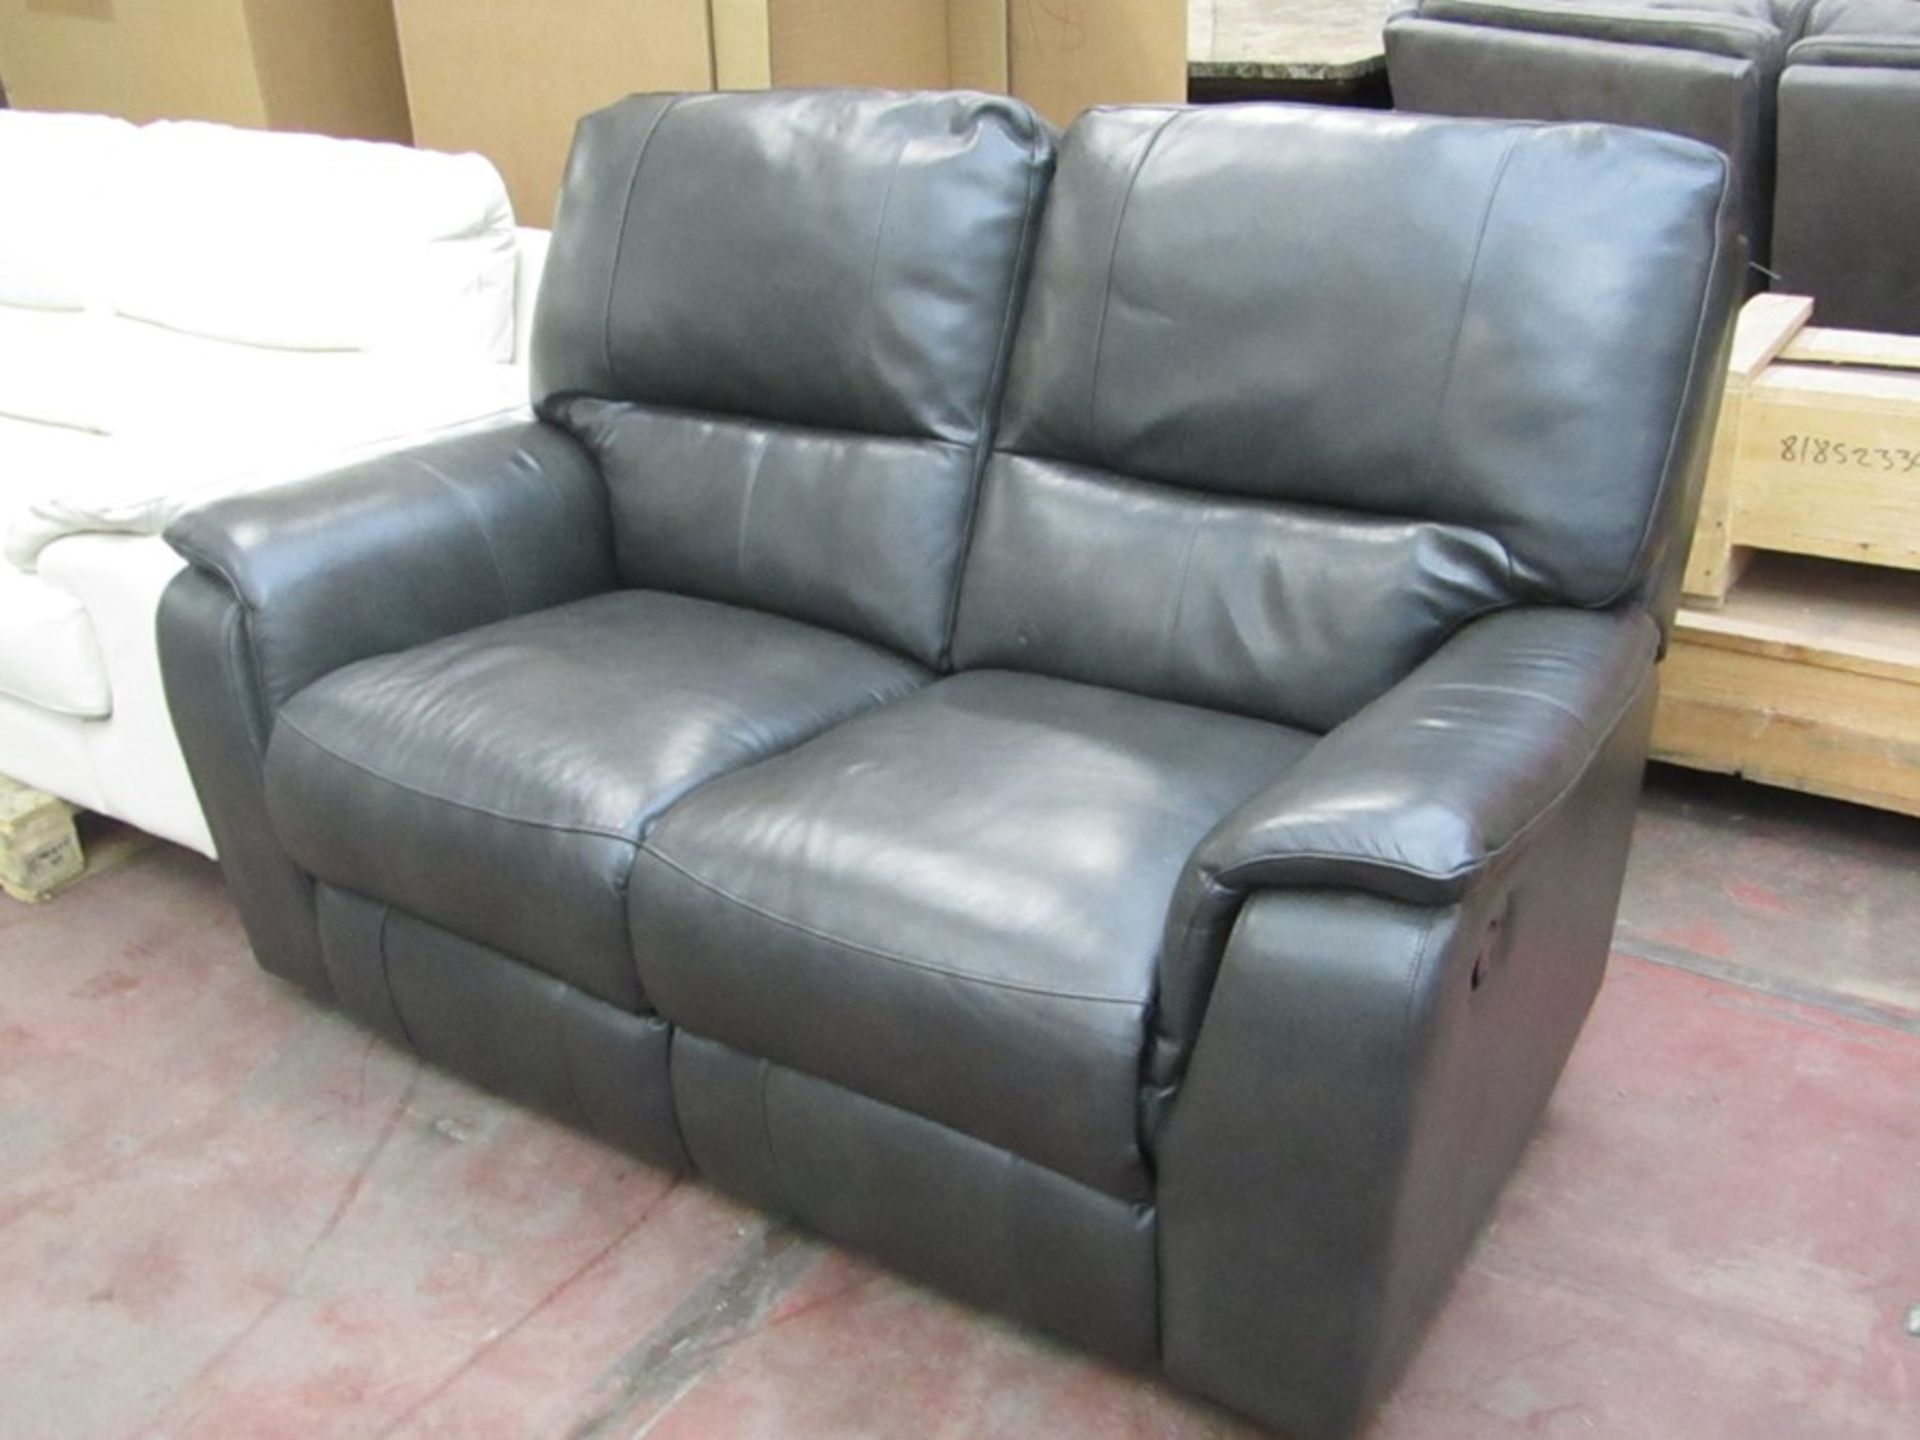 Pair of Costco brown leather reclining arm chairs, one has marks on back.